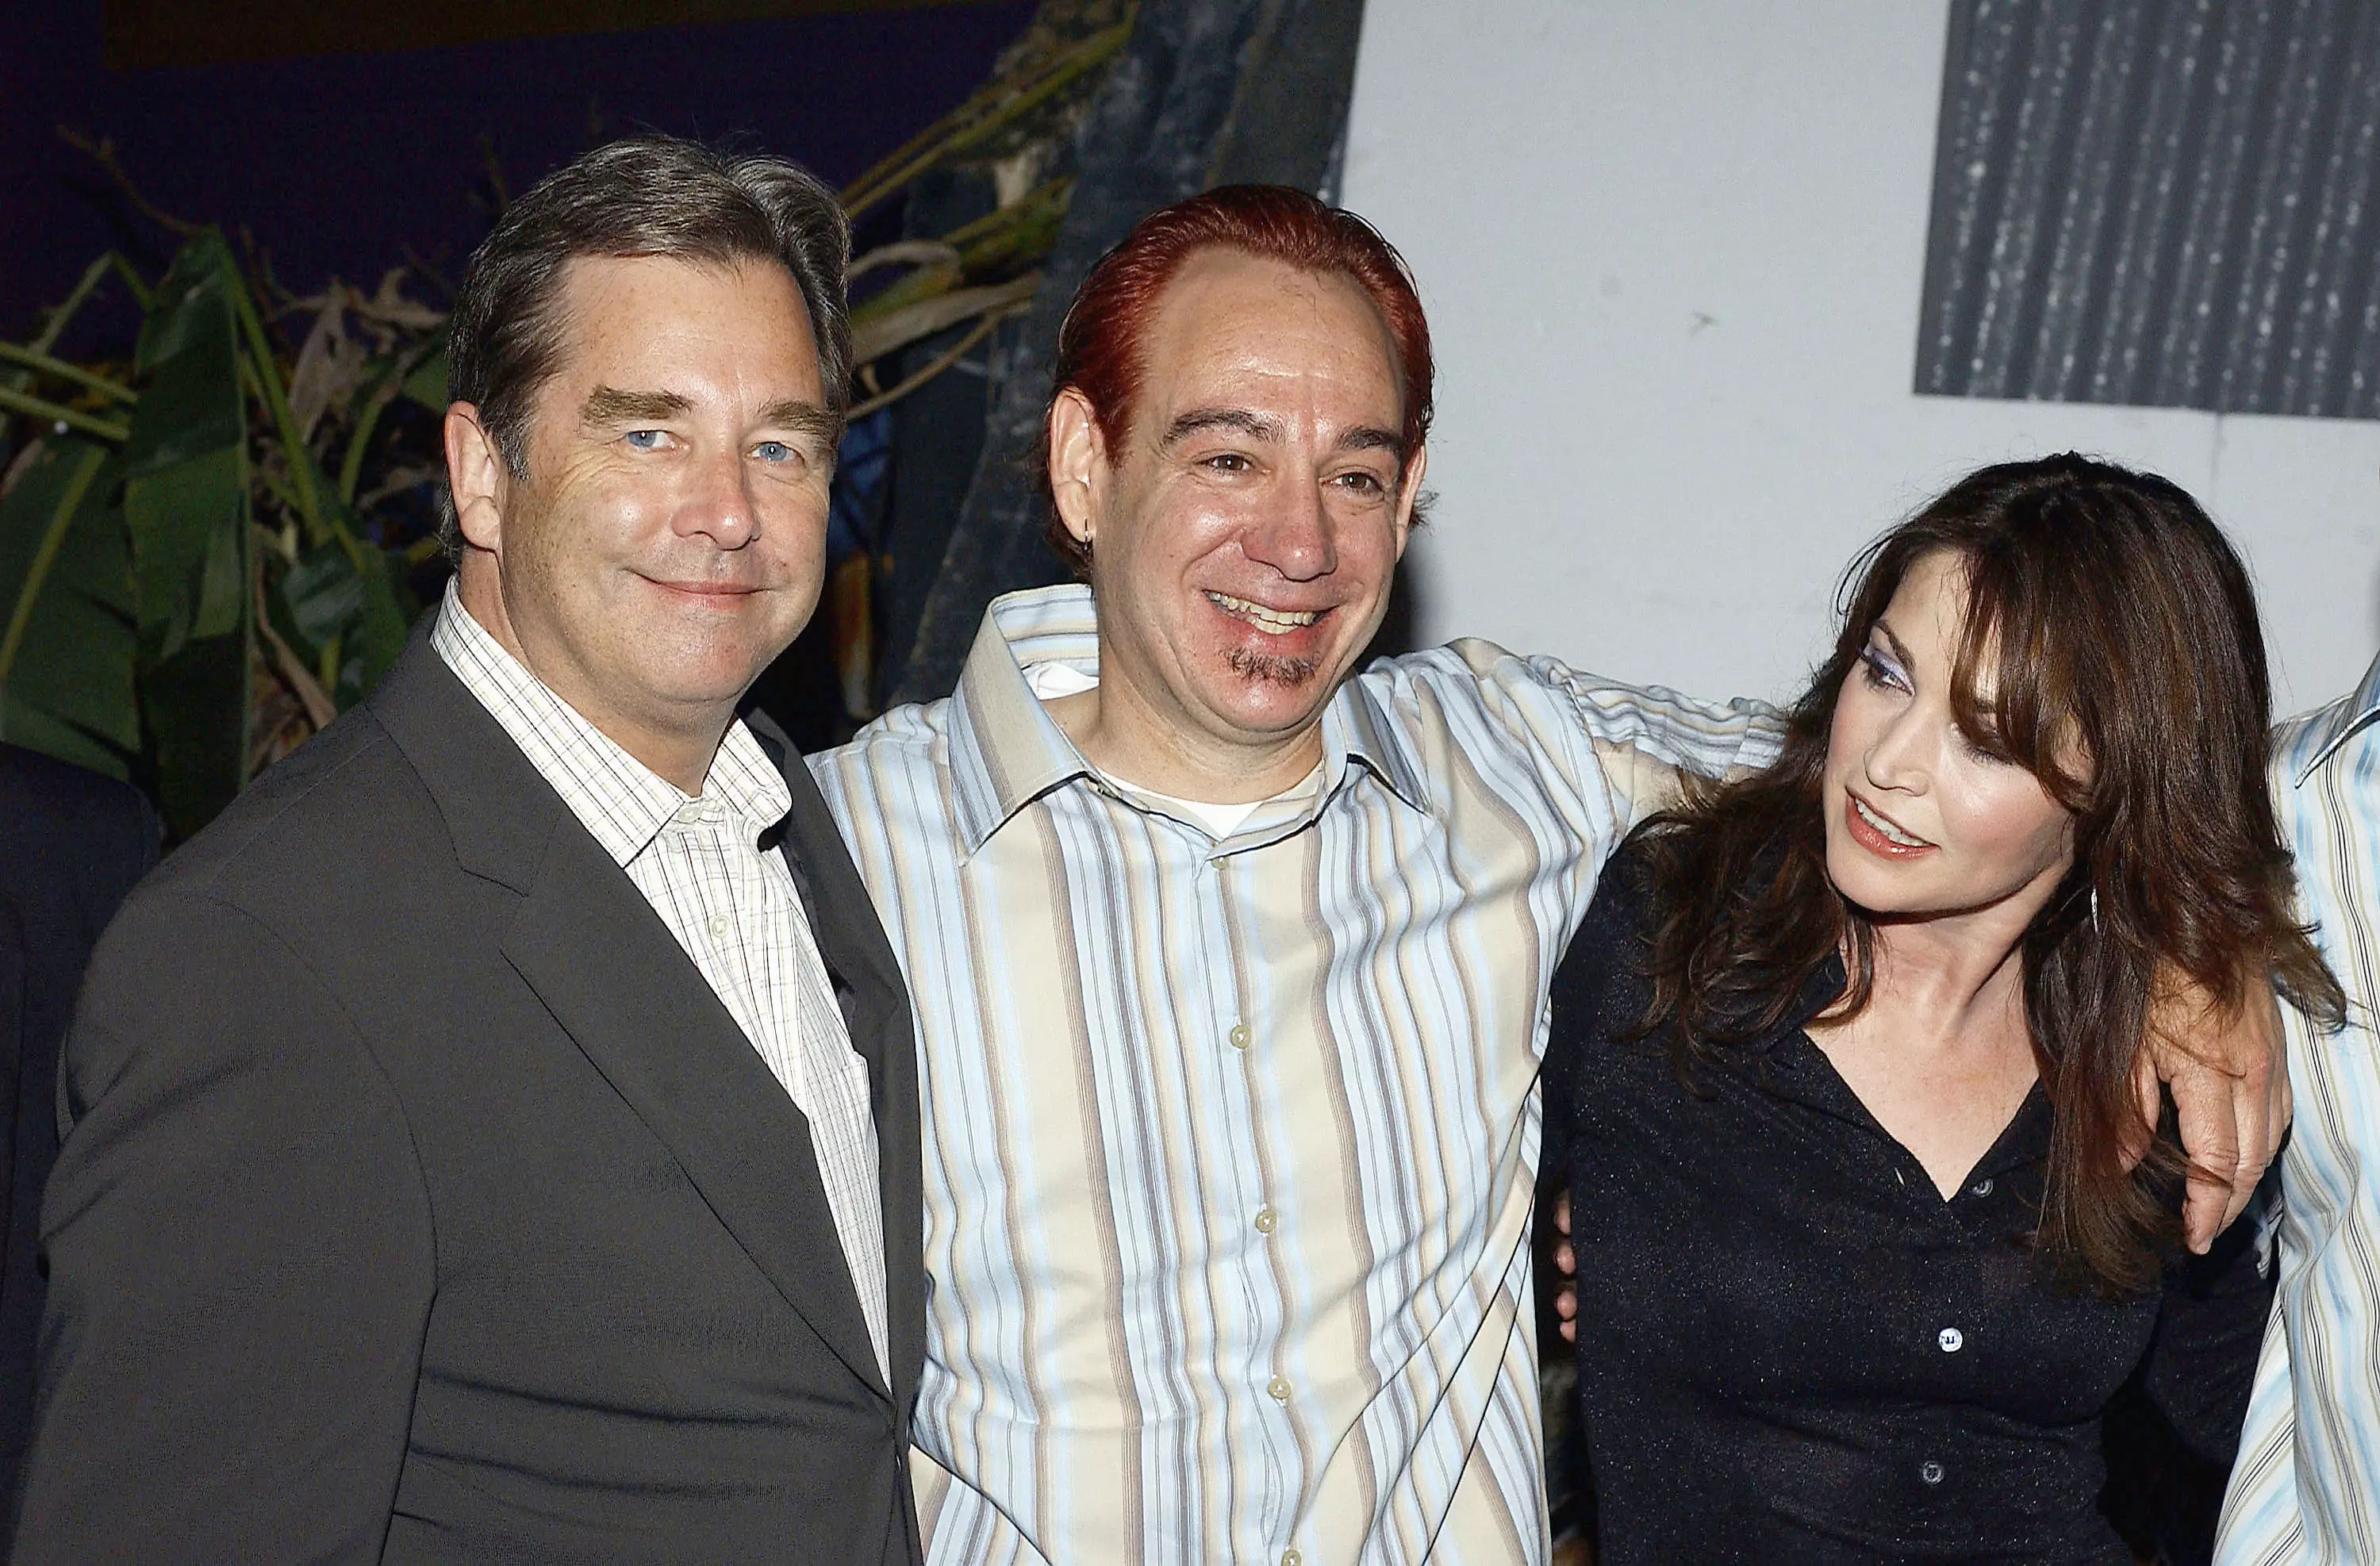 John Lafia (centre) with actors Beau Bridges and Kim Delaney at the premiere of '10.5' in 2004.